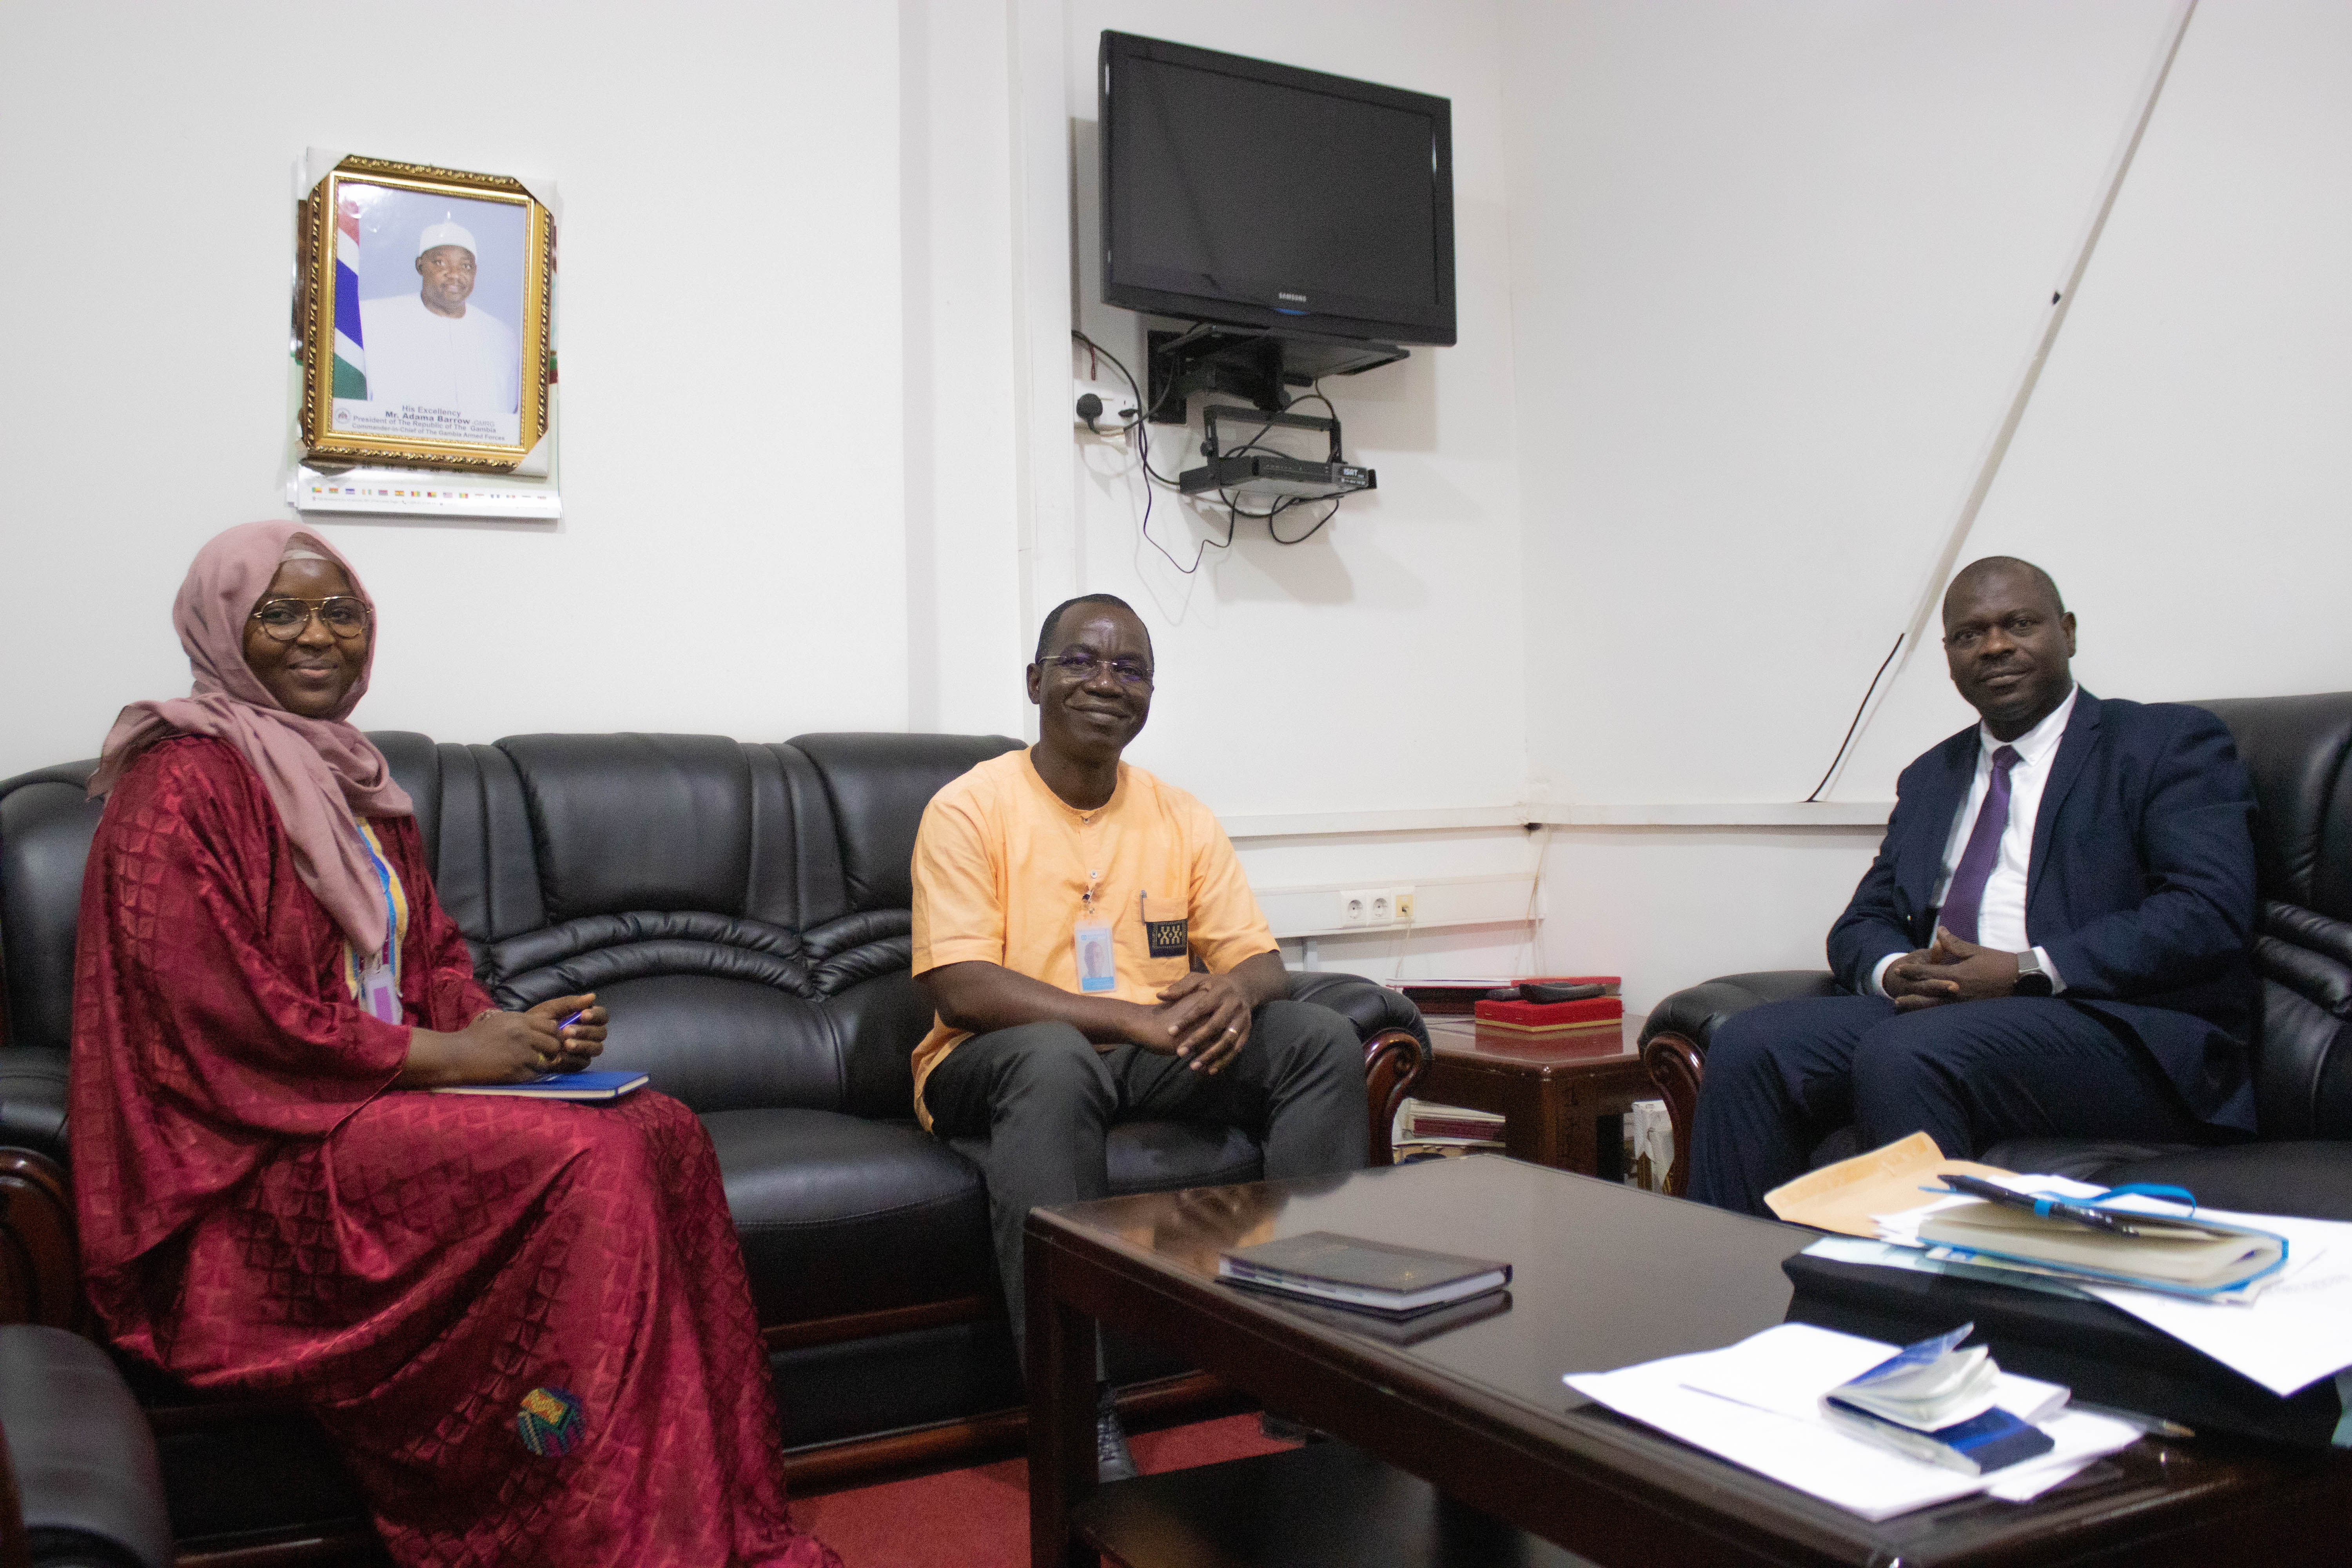 SOS Children’s Villages Management in The Gambia met with the Gambian Minister of Finance and Economic Affairs.